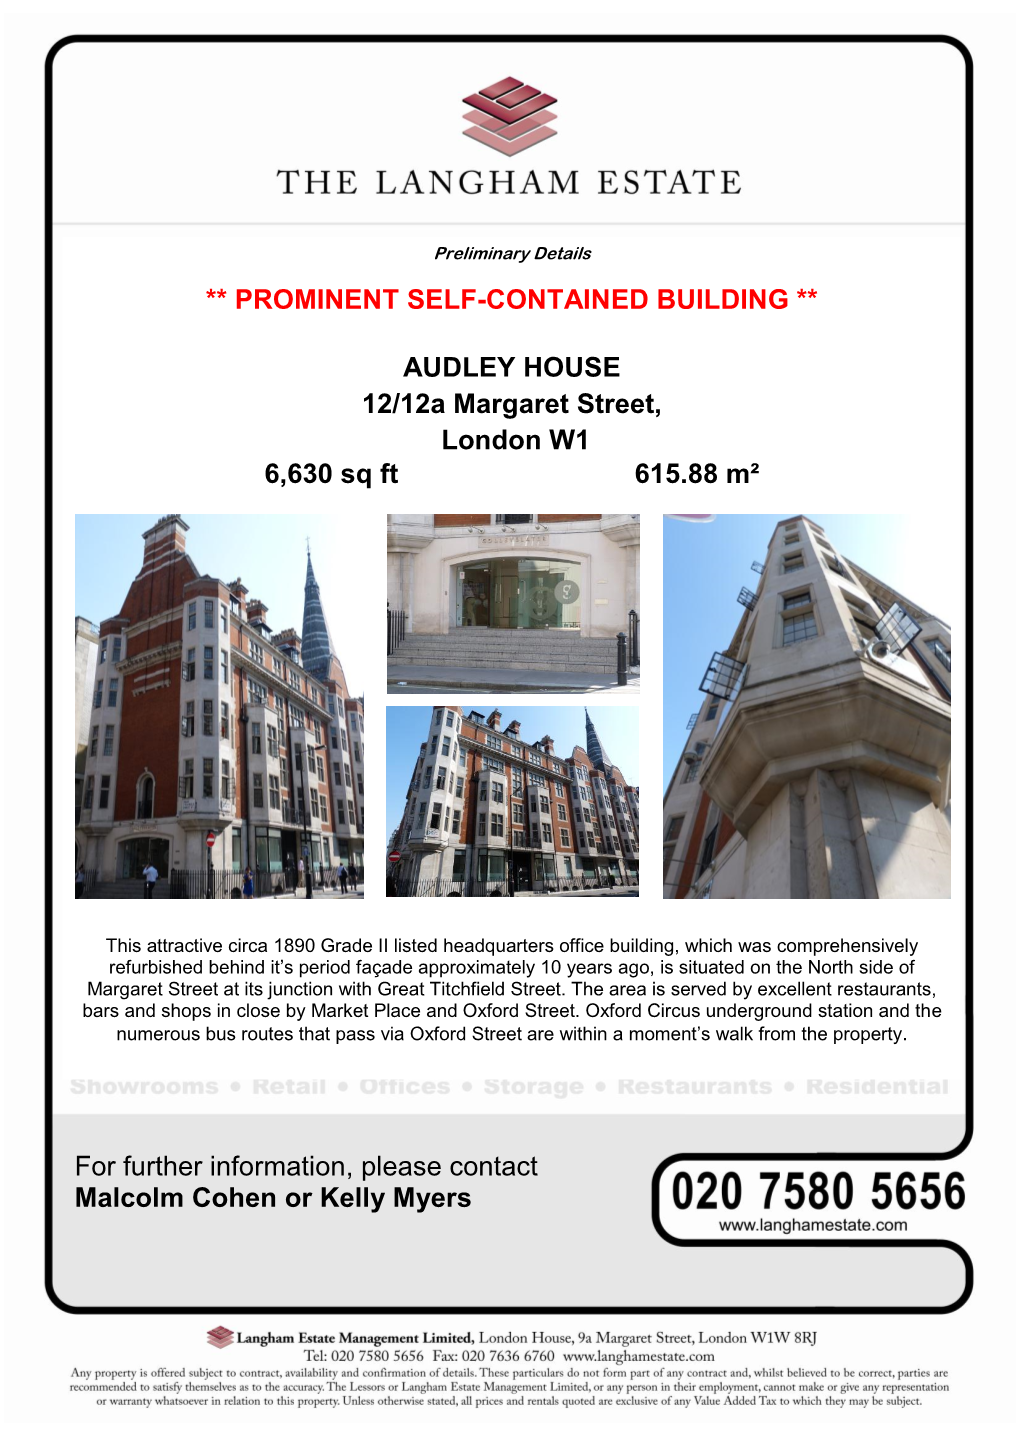 PROMINENT SELF-CONTAINED BUILDING ** AUDLEY HOUSE 12/12A Margaret Street, London W1 6630 Sq Ft 615.88 M² for Further Info